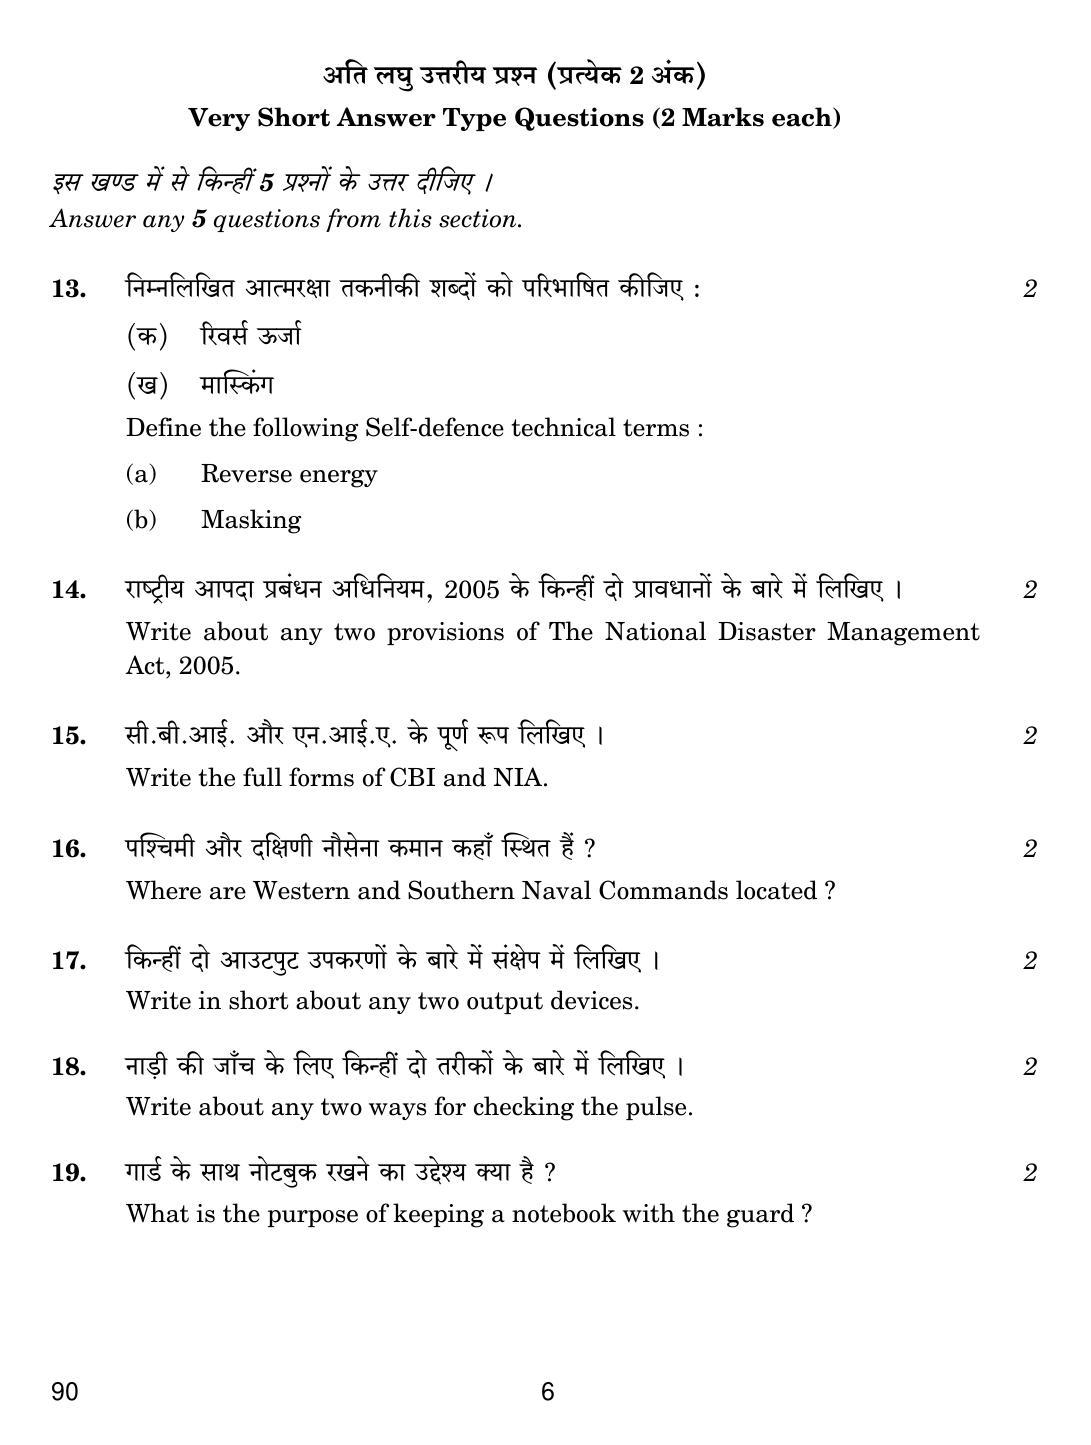 CBSE Class 10 90 SECURITY 2019 Question Paper - Page 6